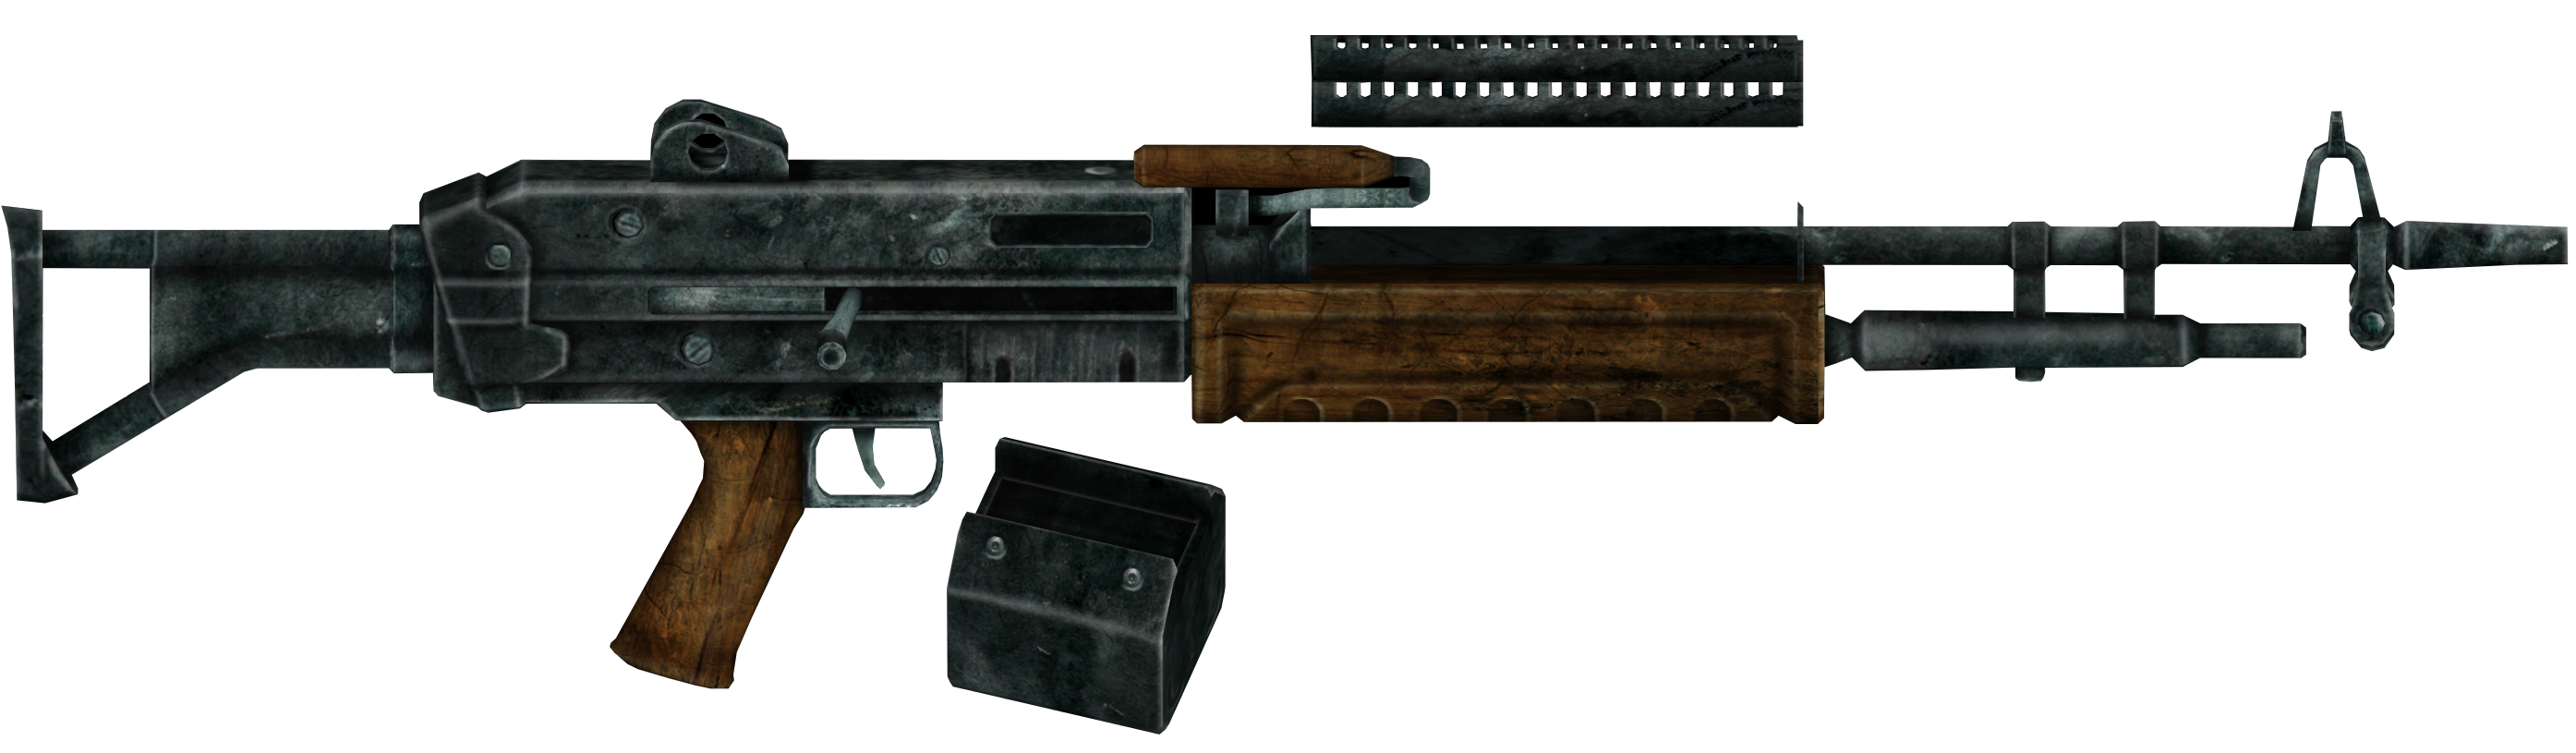 fallout new vegas geck put perks on weapons